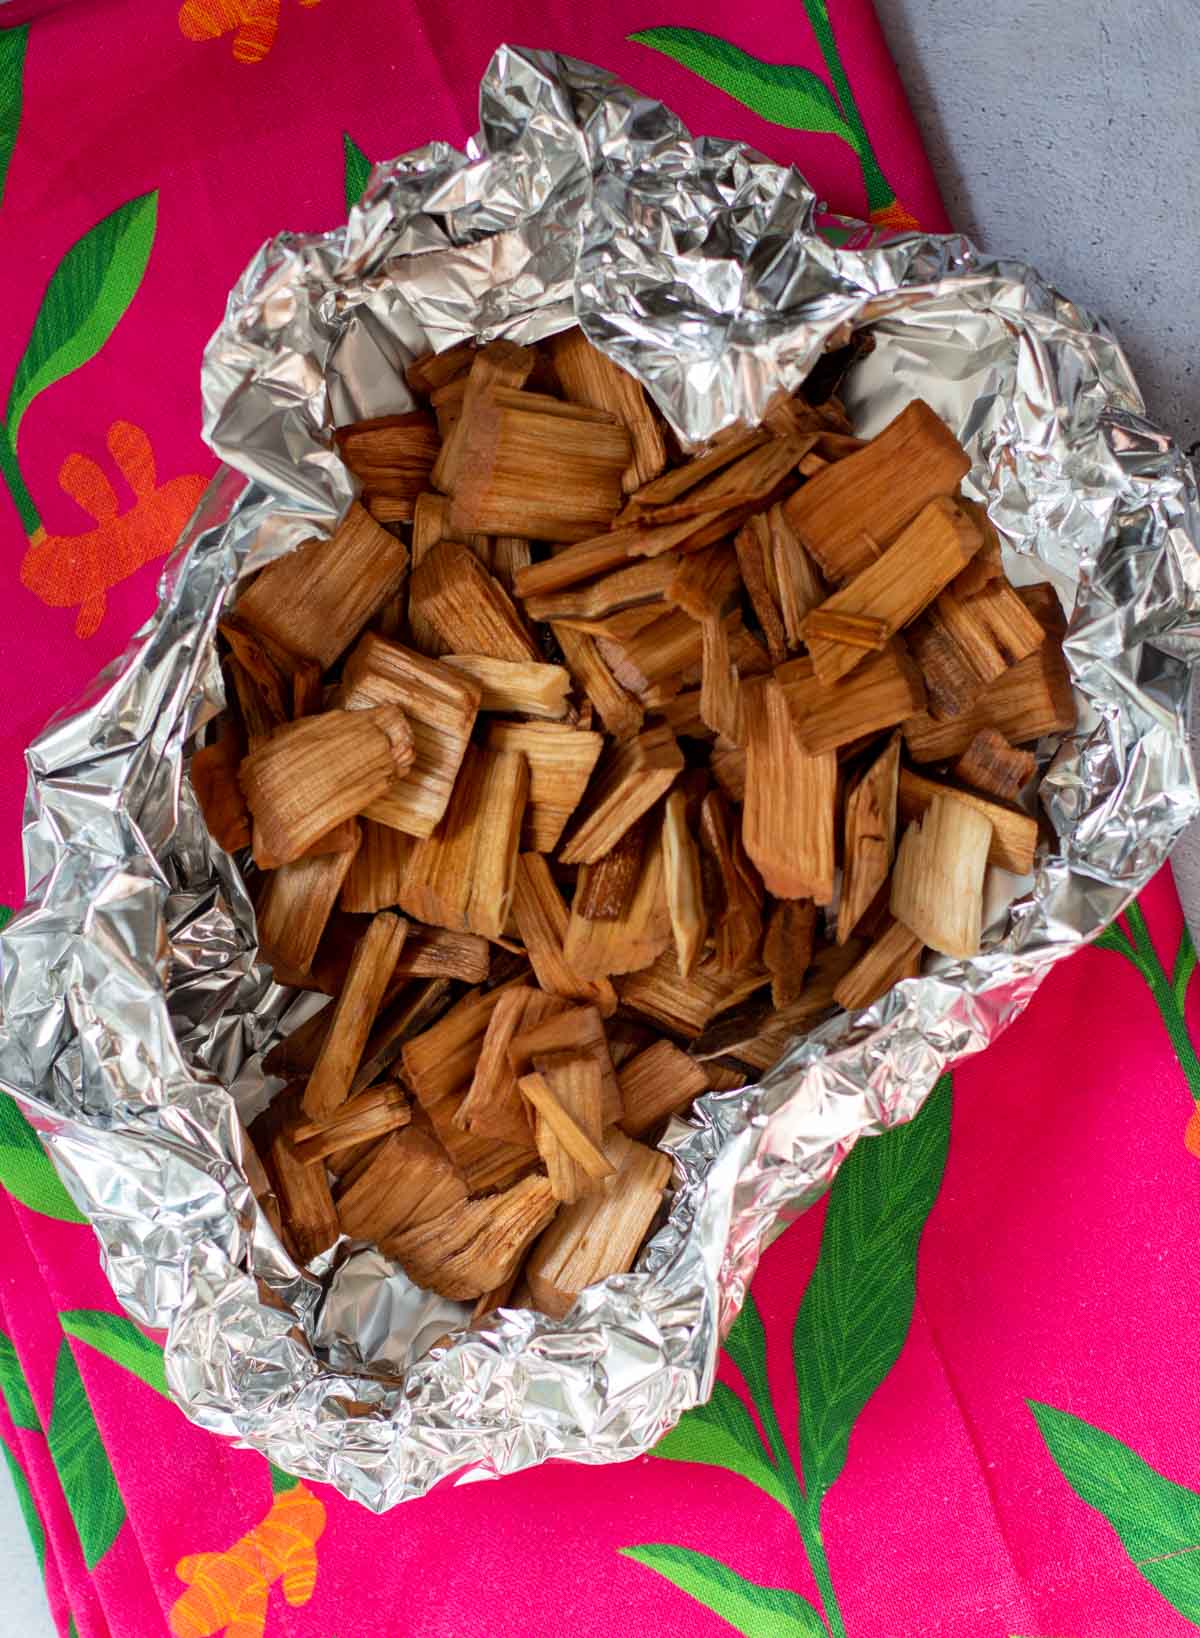 Cherry wood chips in tin foil for grilled chicken.